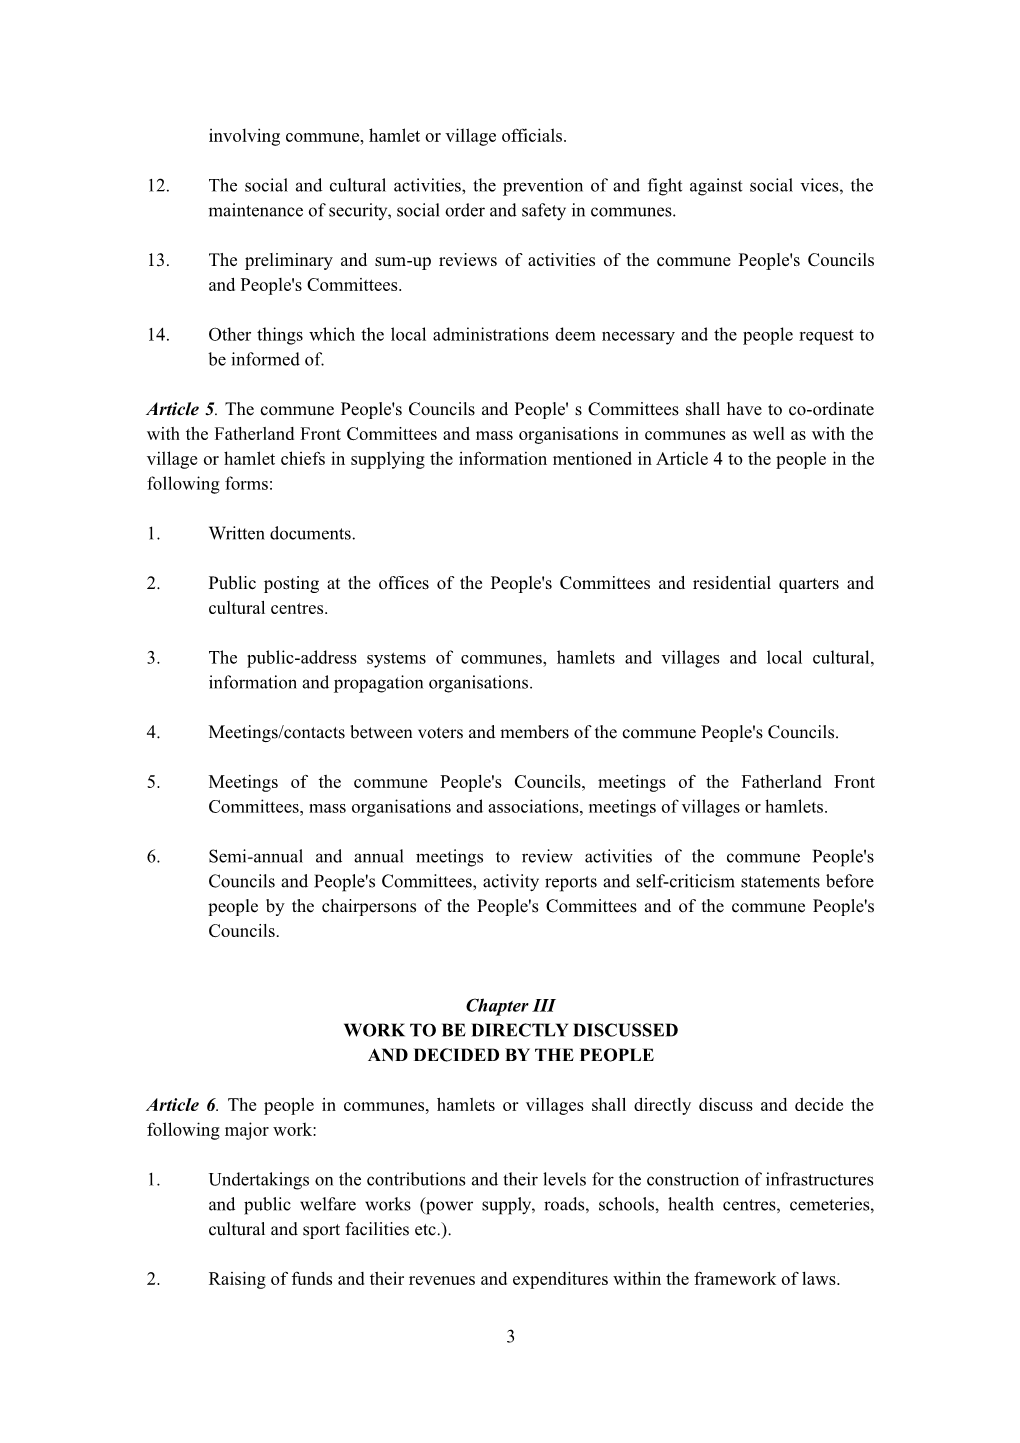 Regulations on the Exercise Of